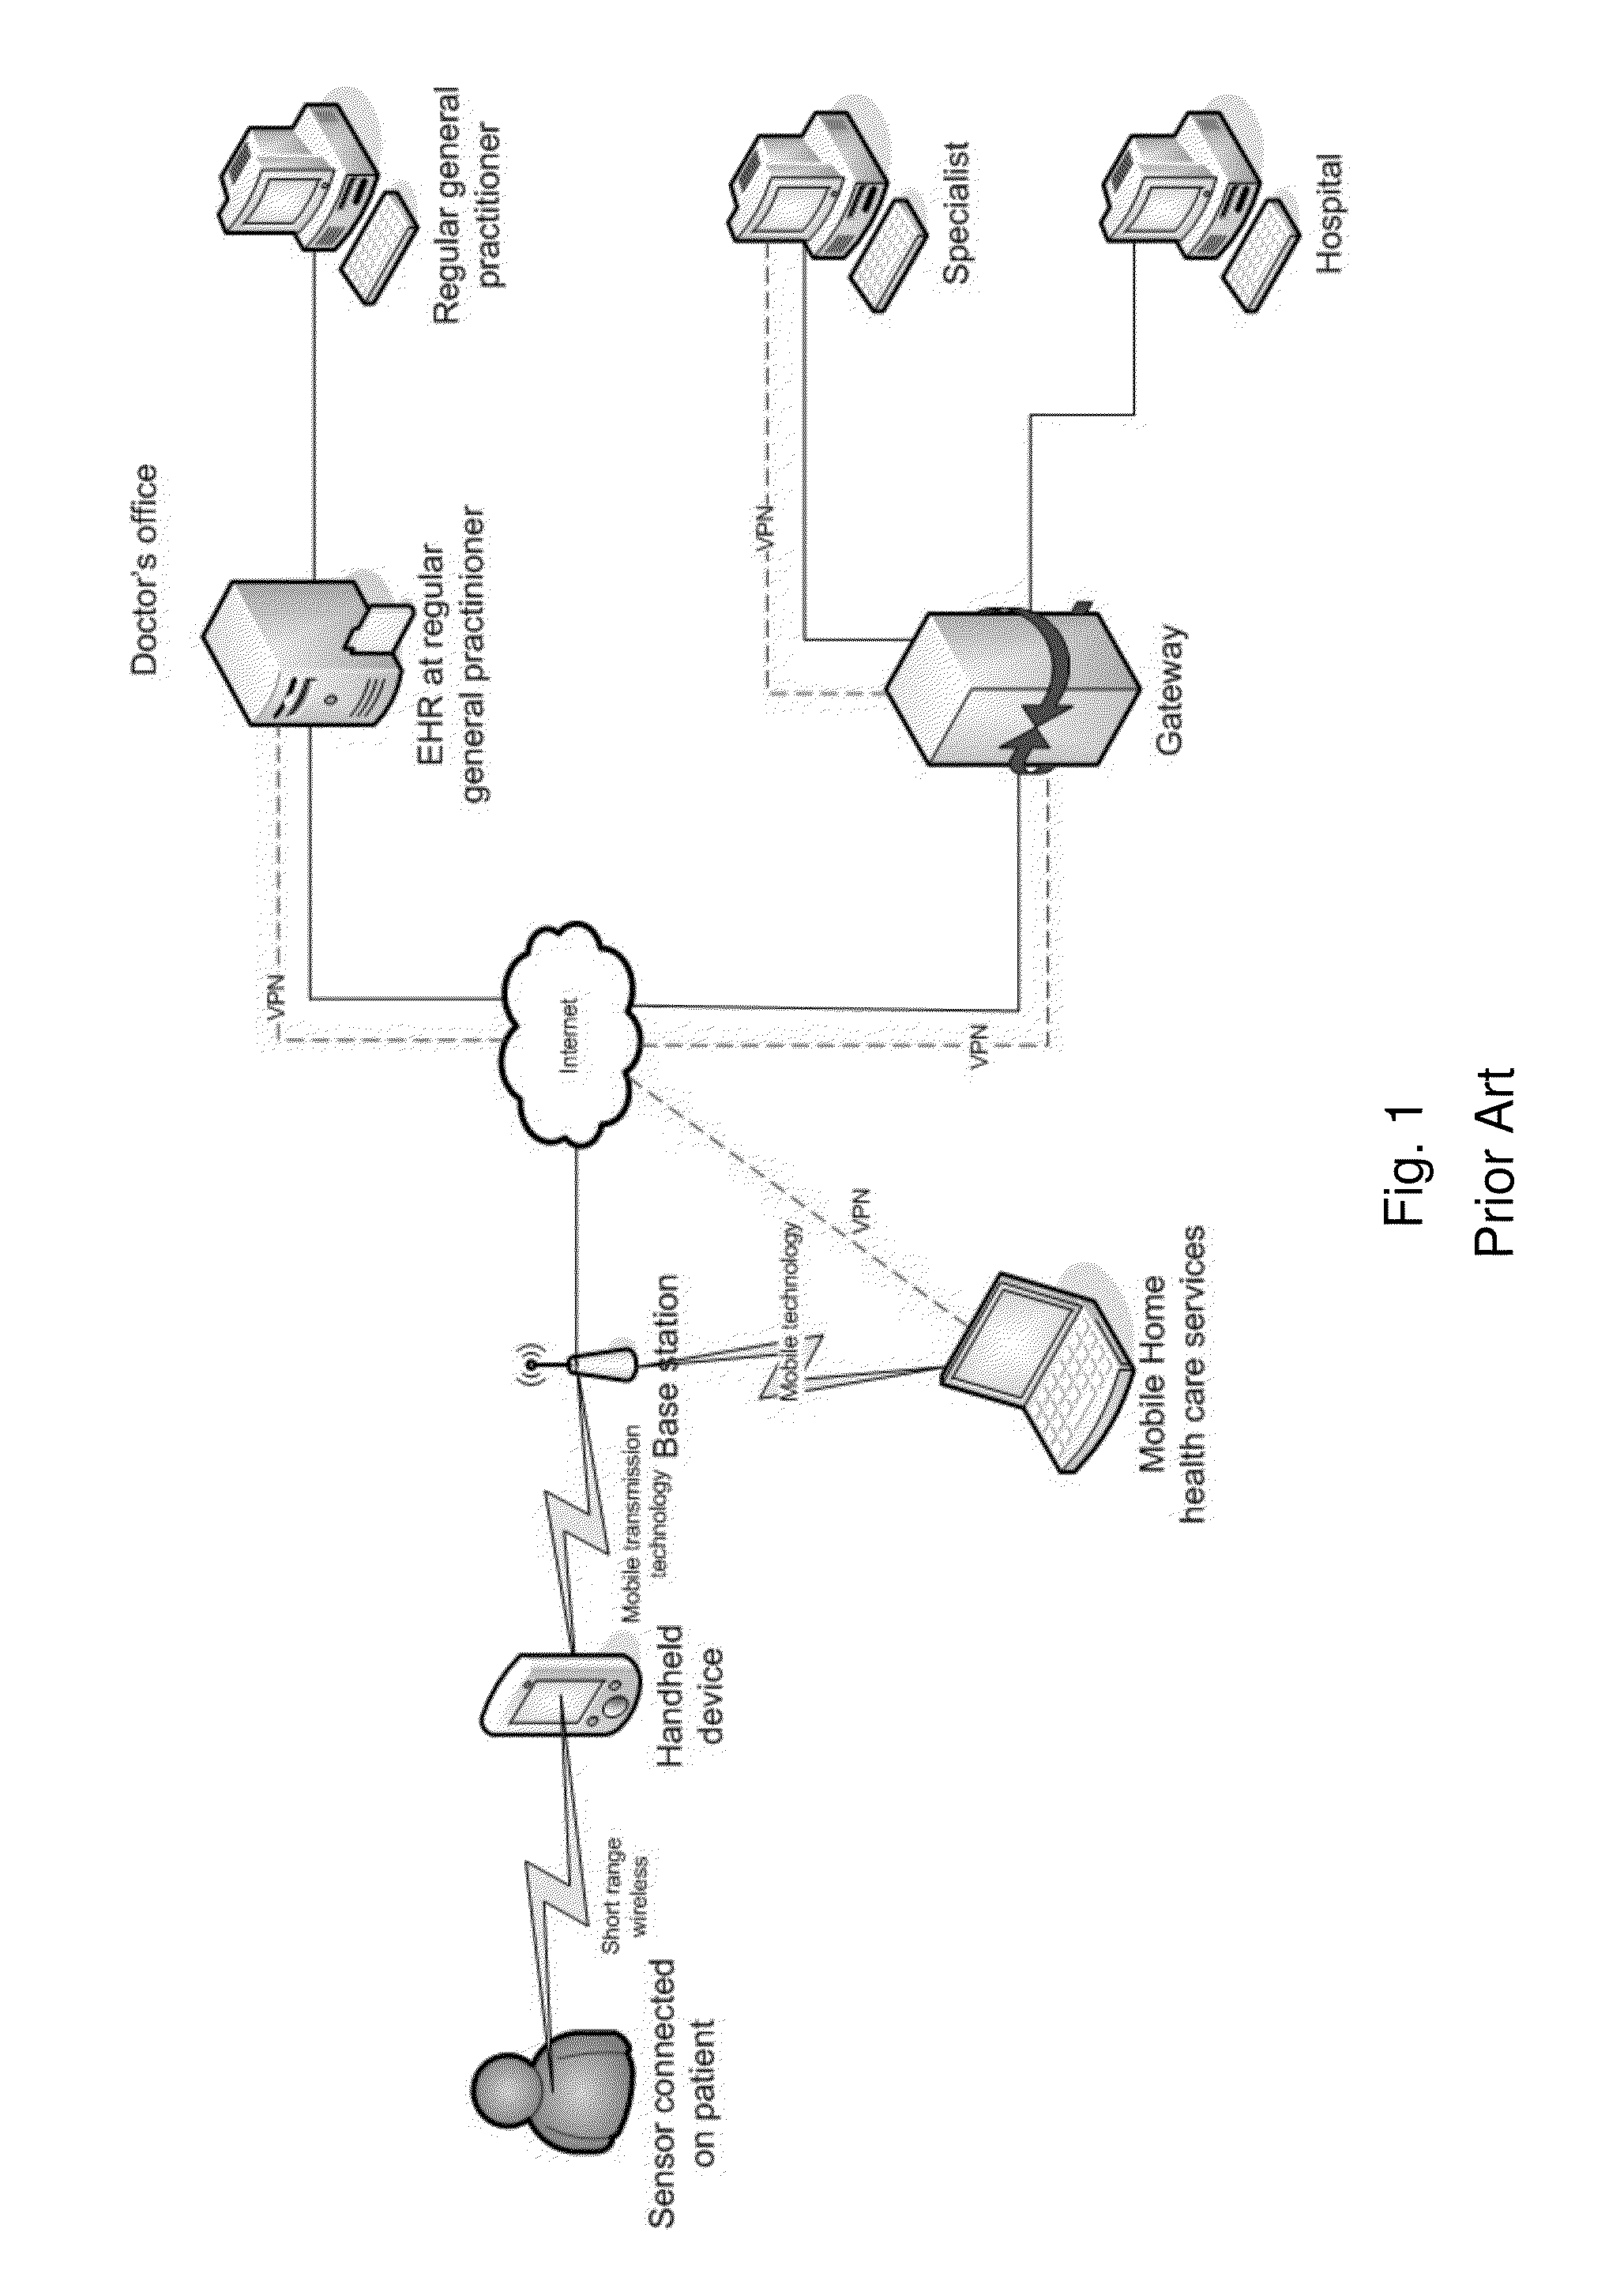 System and method for secure relayed communications from an implantable medical device